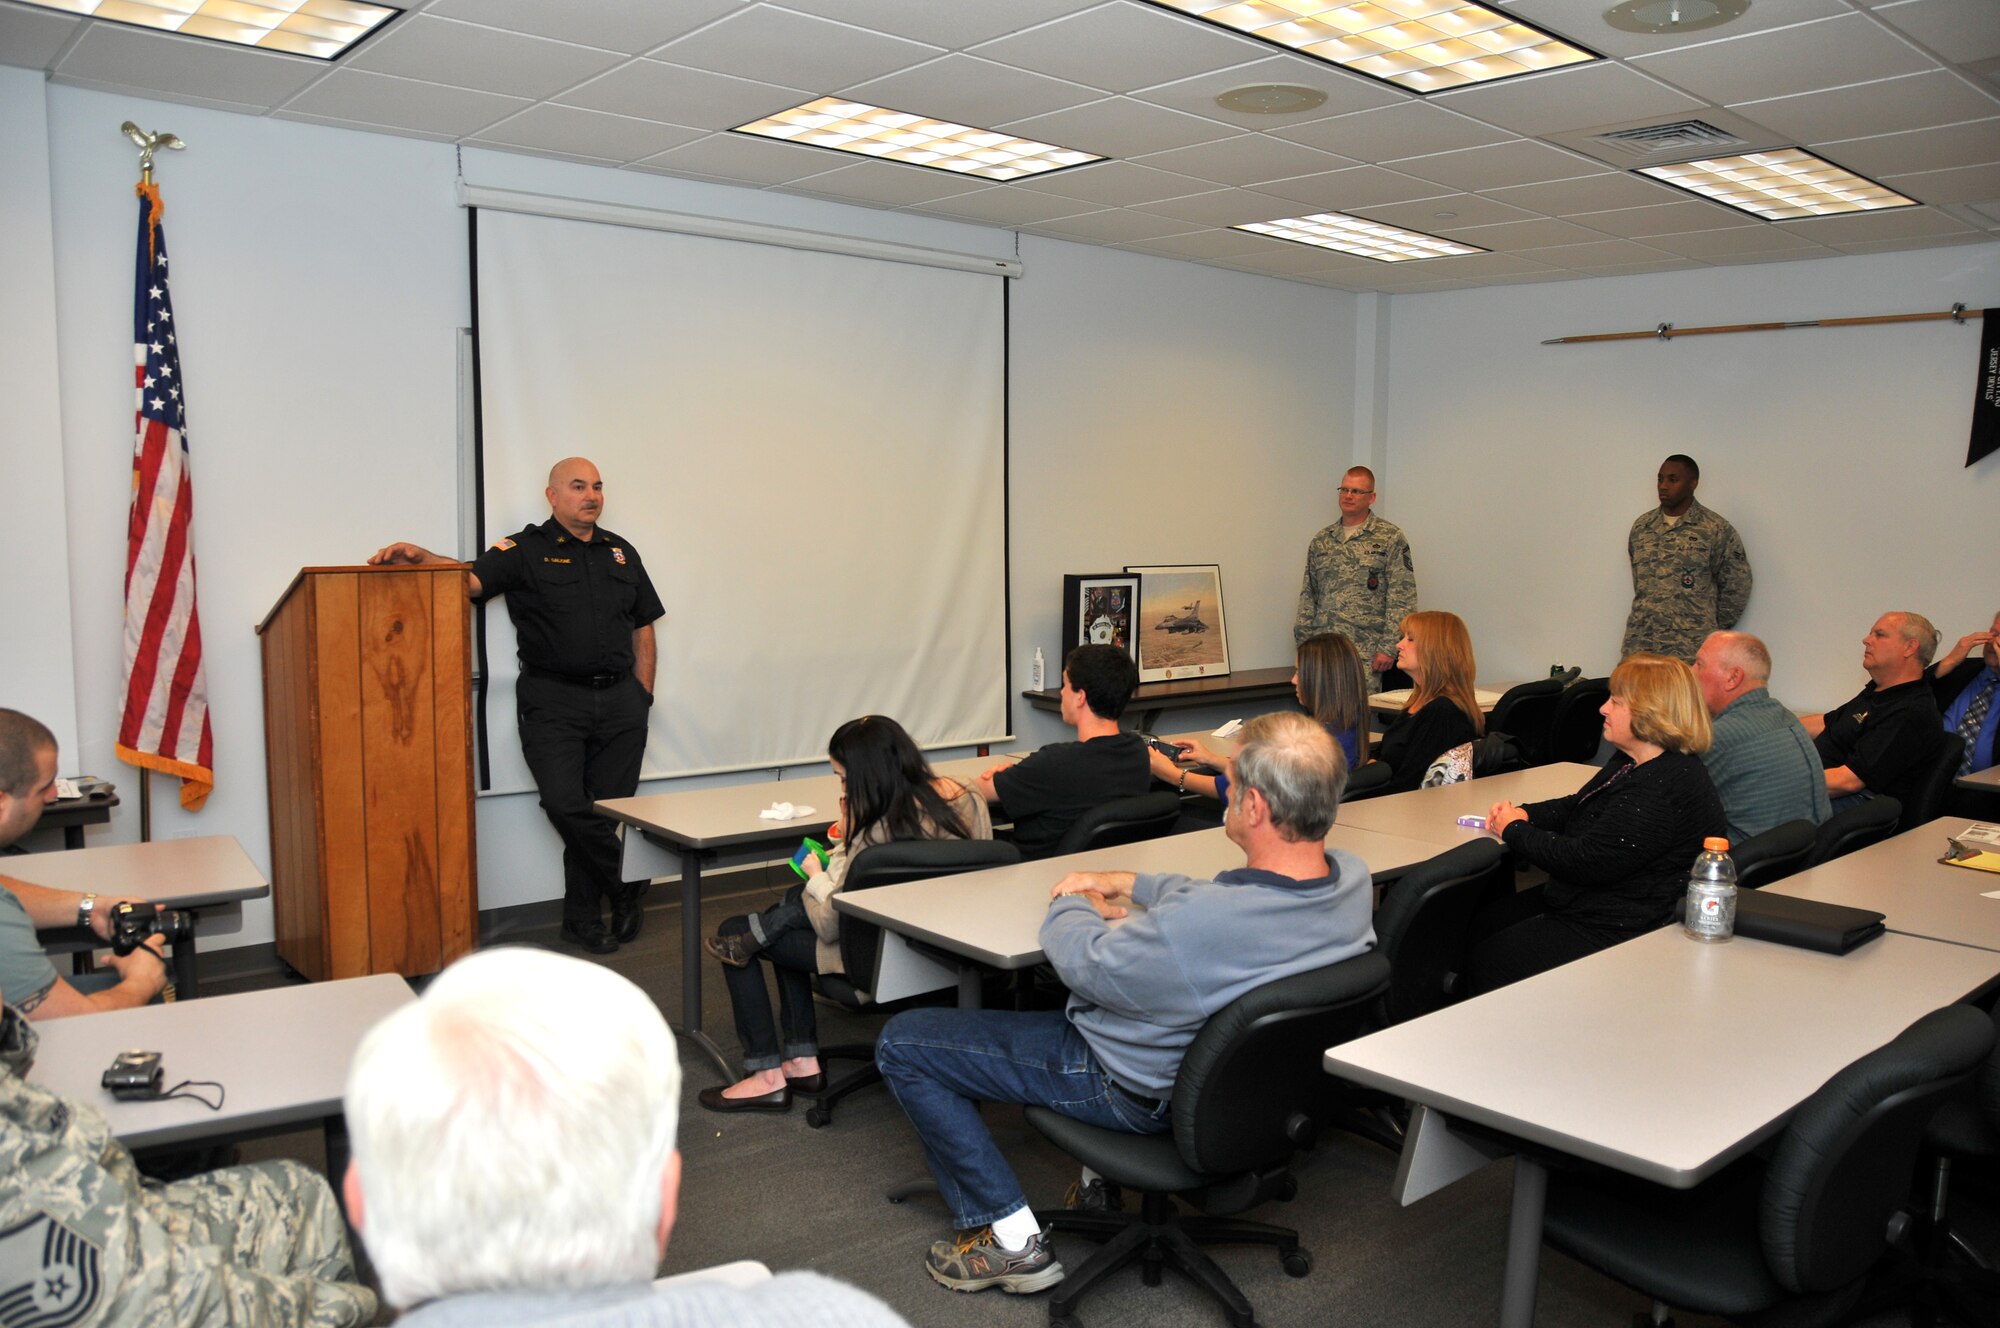 A picture of Chief Master Sgt. Dominick Galione speaking to a group of friends and family upon his retirement.